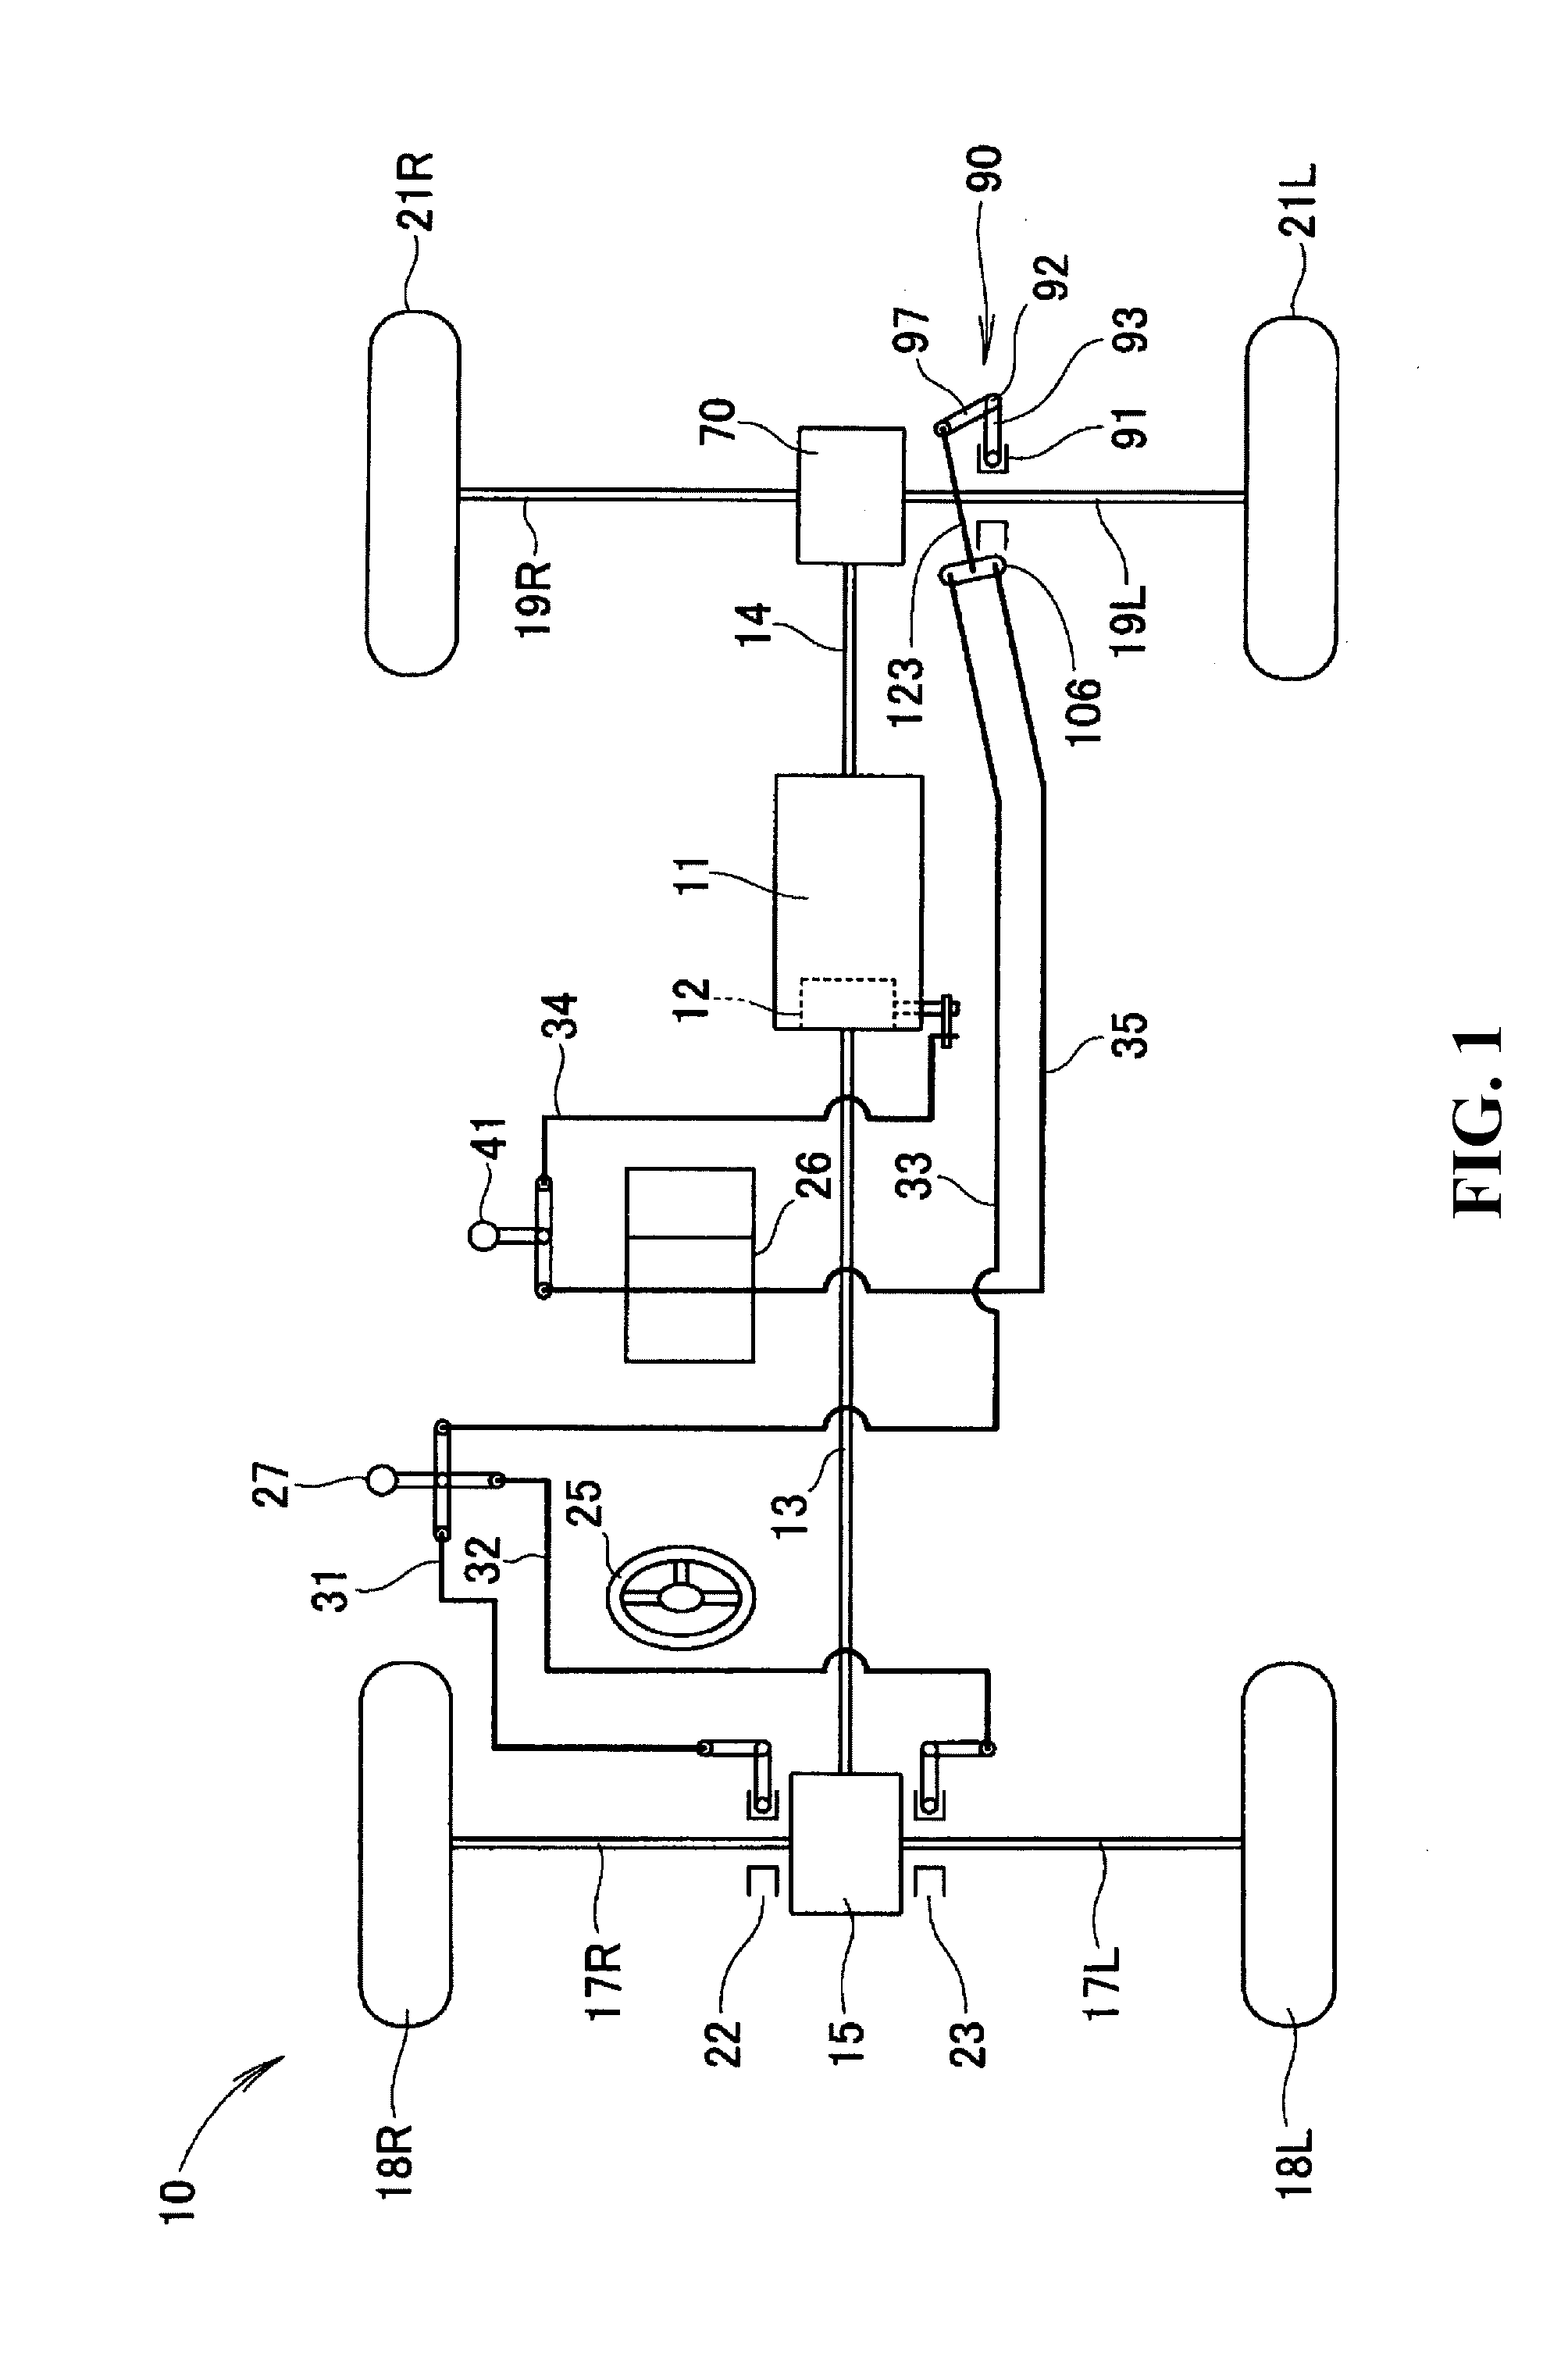 Differential gear provided with differential lock mechanism